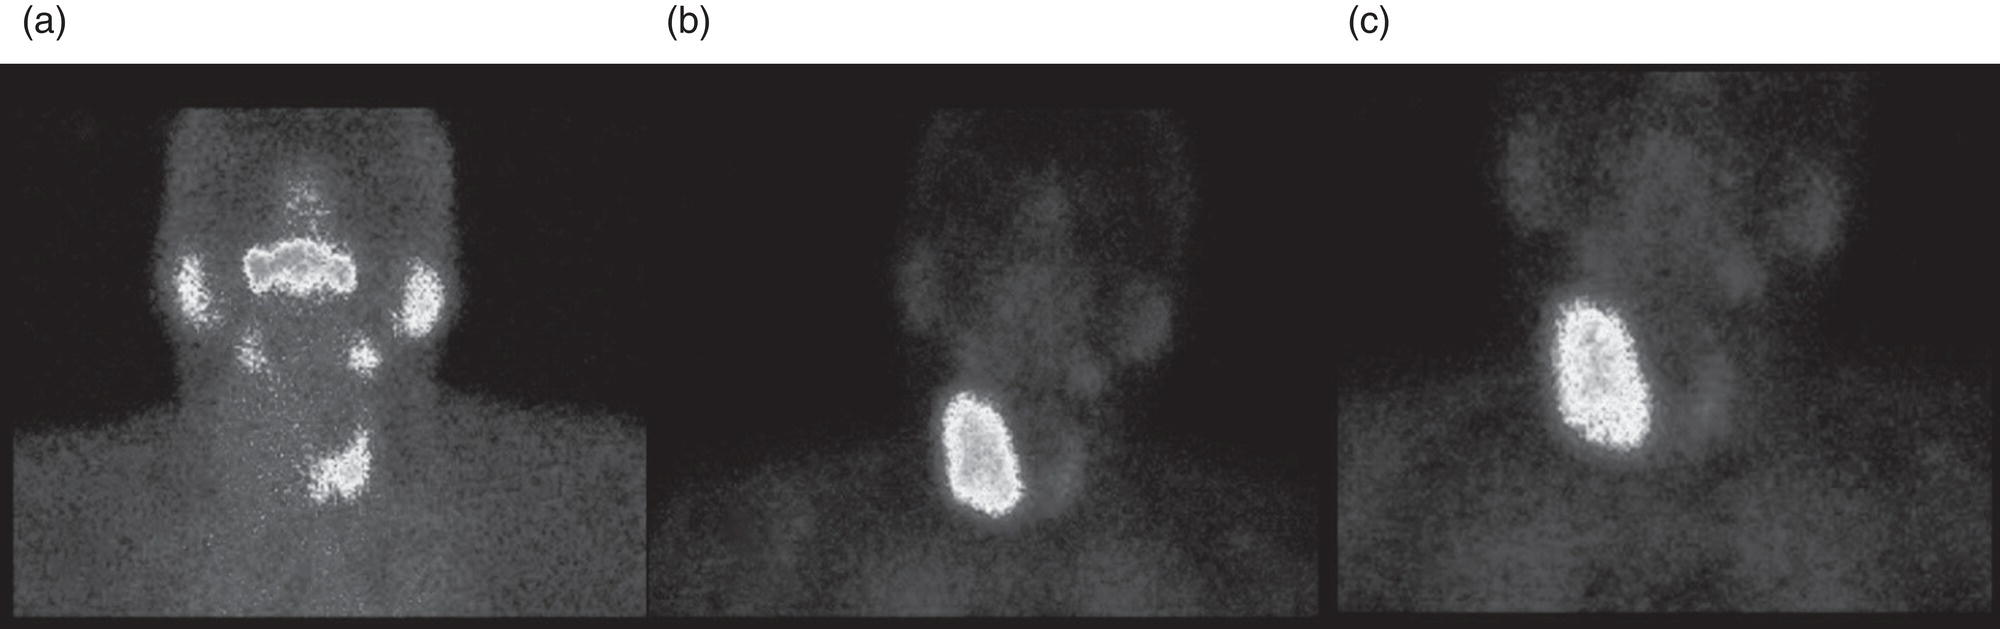 Schematic illustration of 99mTc-MIBI scintigraphy for differentiation of malignant thyroid lesions in a 40-year-old female with a cold nodule on 99mTc thyroid scan (a). Early (b) and delayed (c) phase 99mTc-MIBI scintigraphy demonstrate obvious retention of 99mTc-MIBI. FNA biopsy of the patient indicated a benign lesion, but the excision biopsy showed papillary thyroid carcinoma.